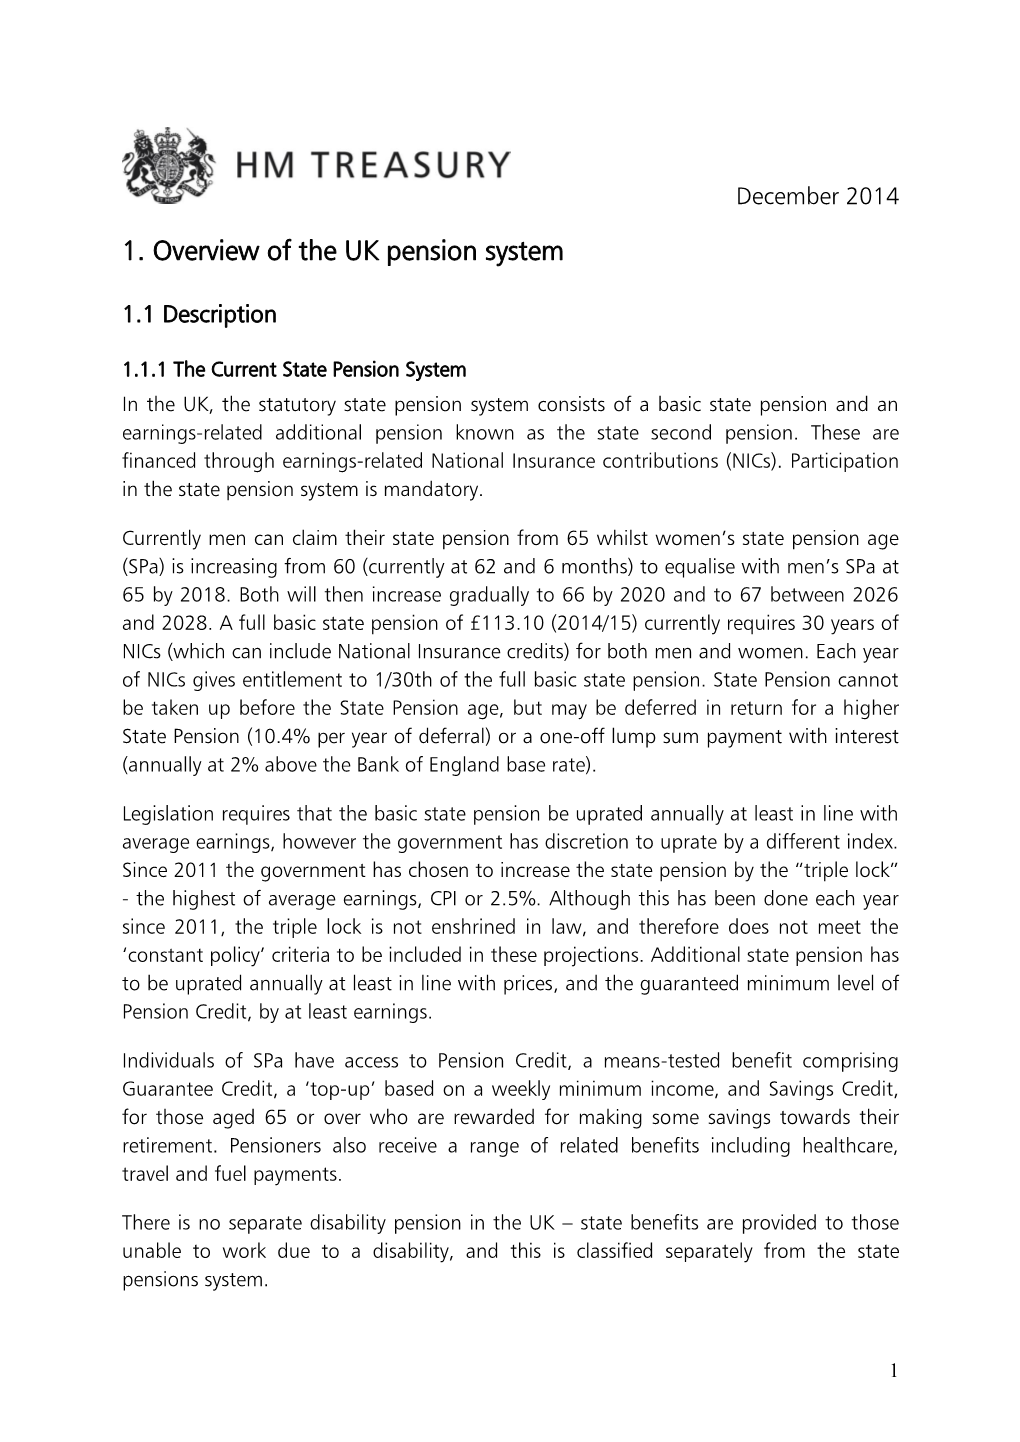 1. Overview of the UK Pension System